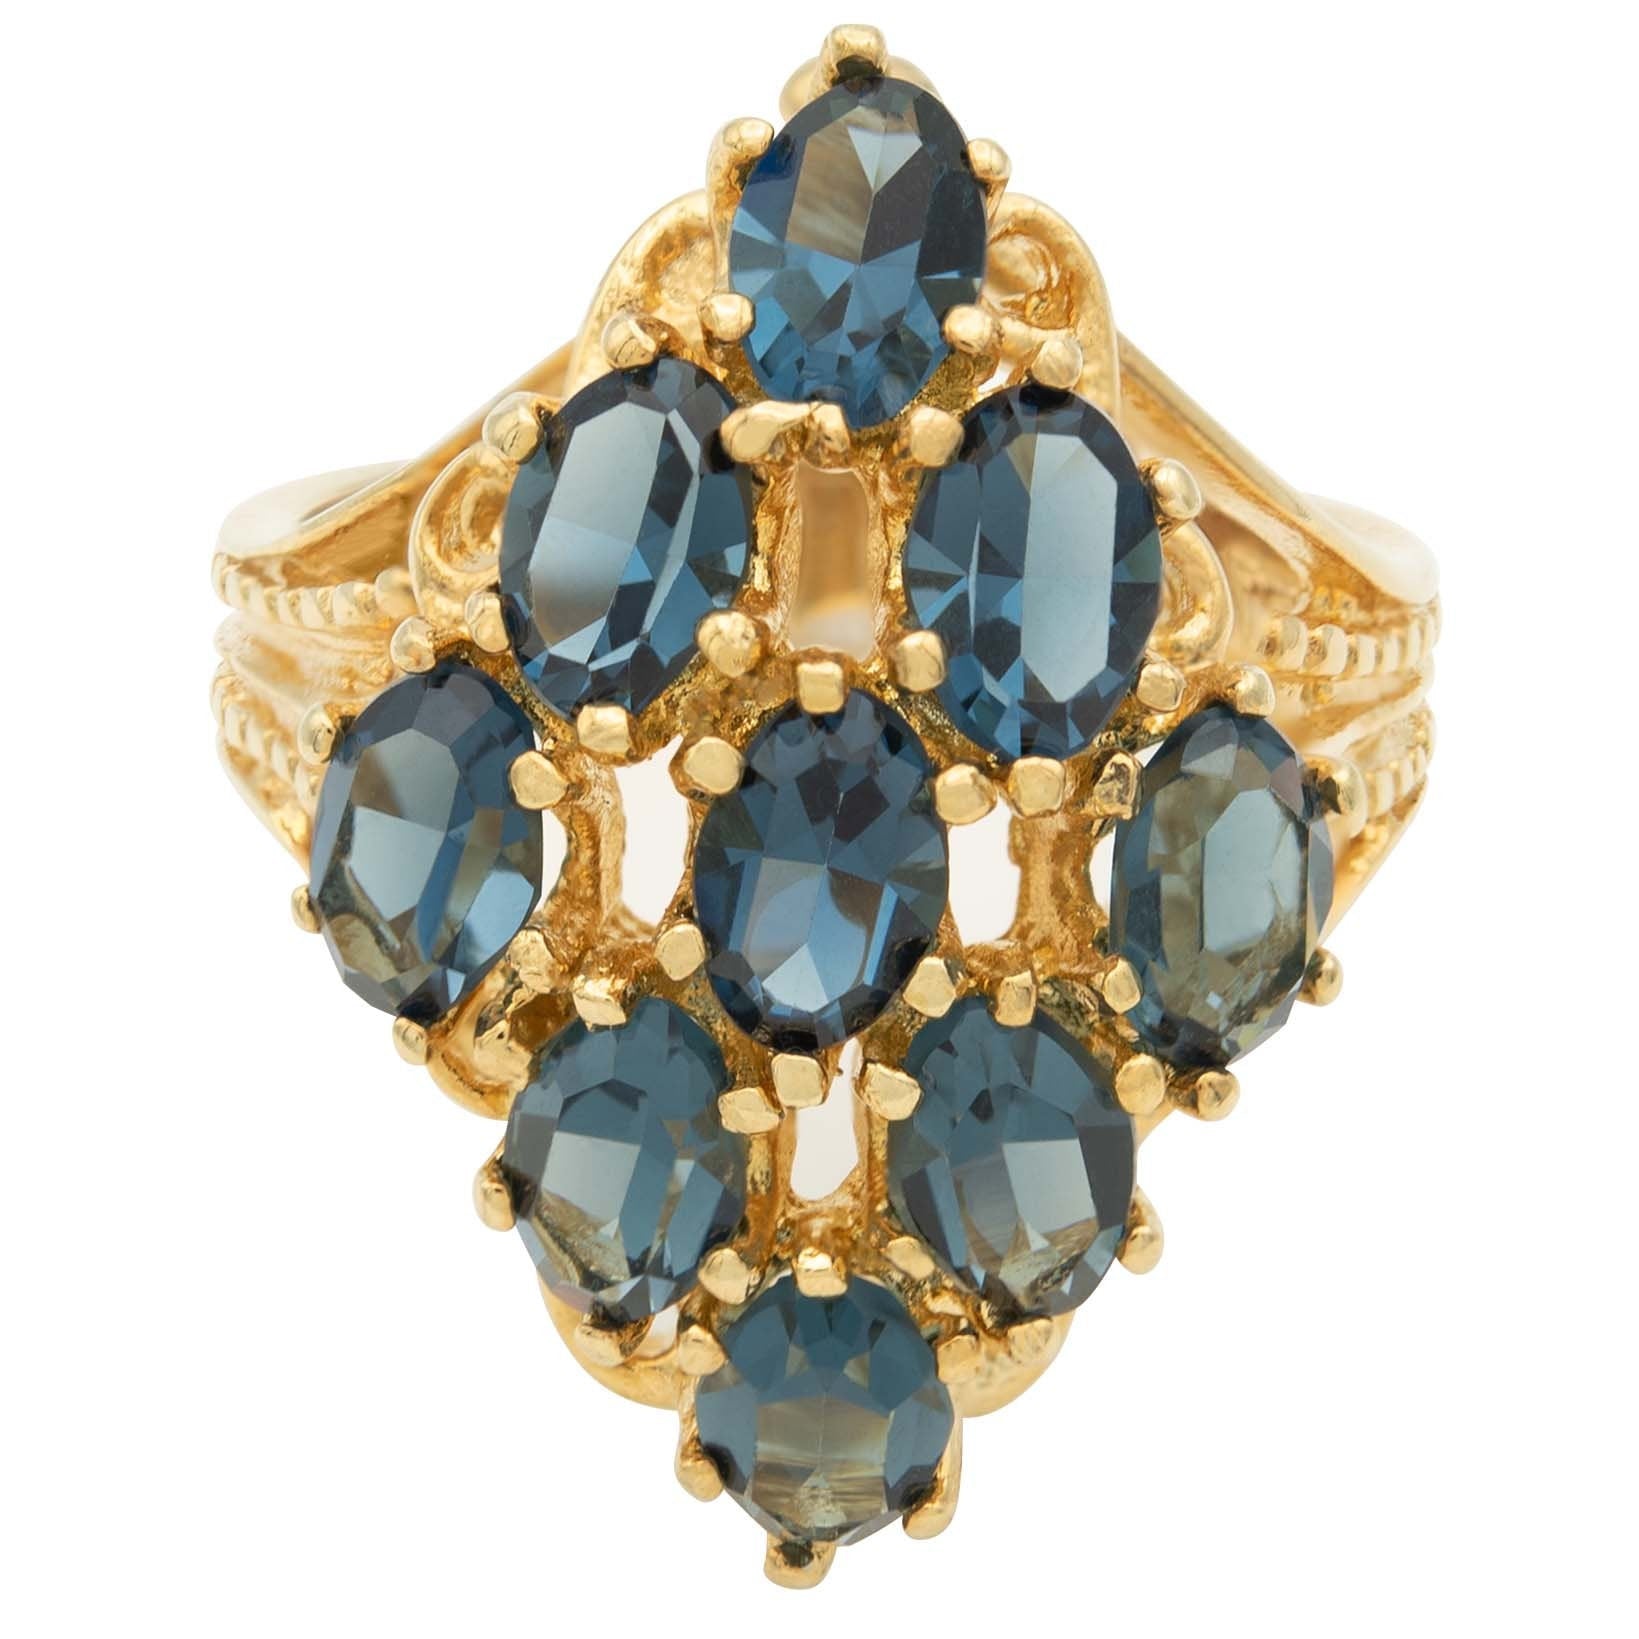 Vintage Ring Sapphire Austrian Crystal Cocktail Ring 18k Gold  R284 - Limited Stock - Never Worn